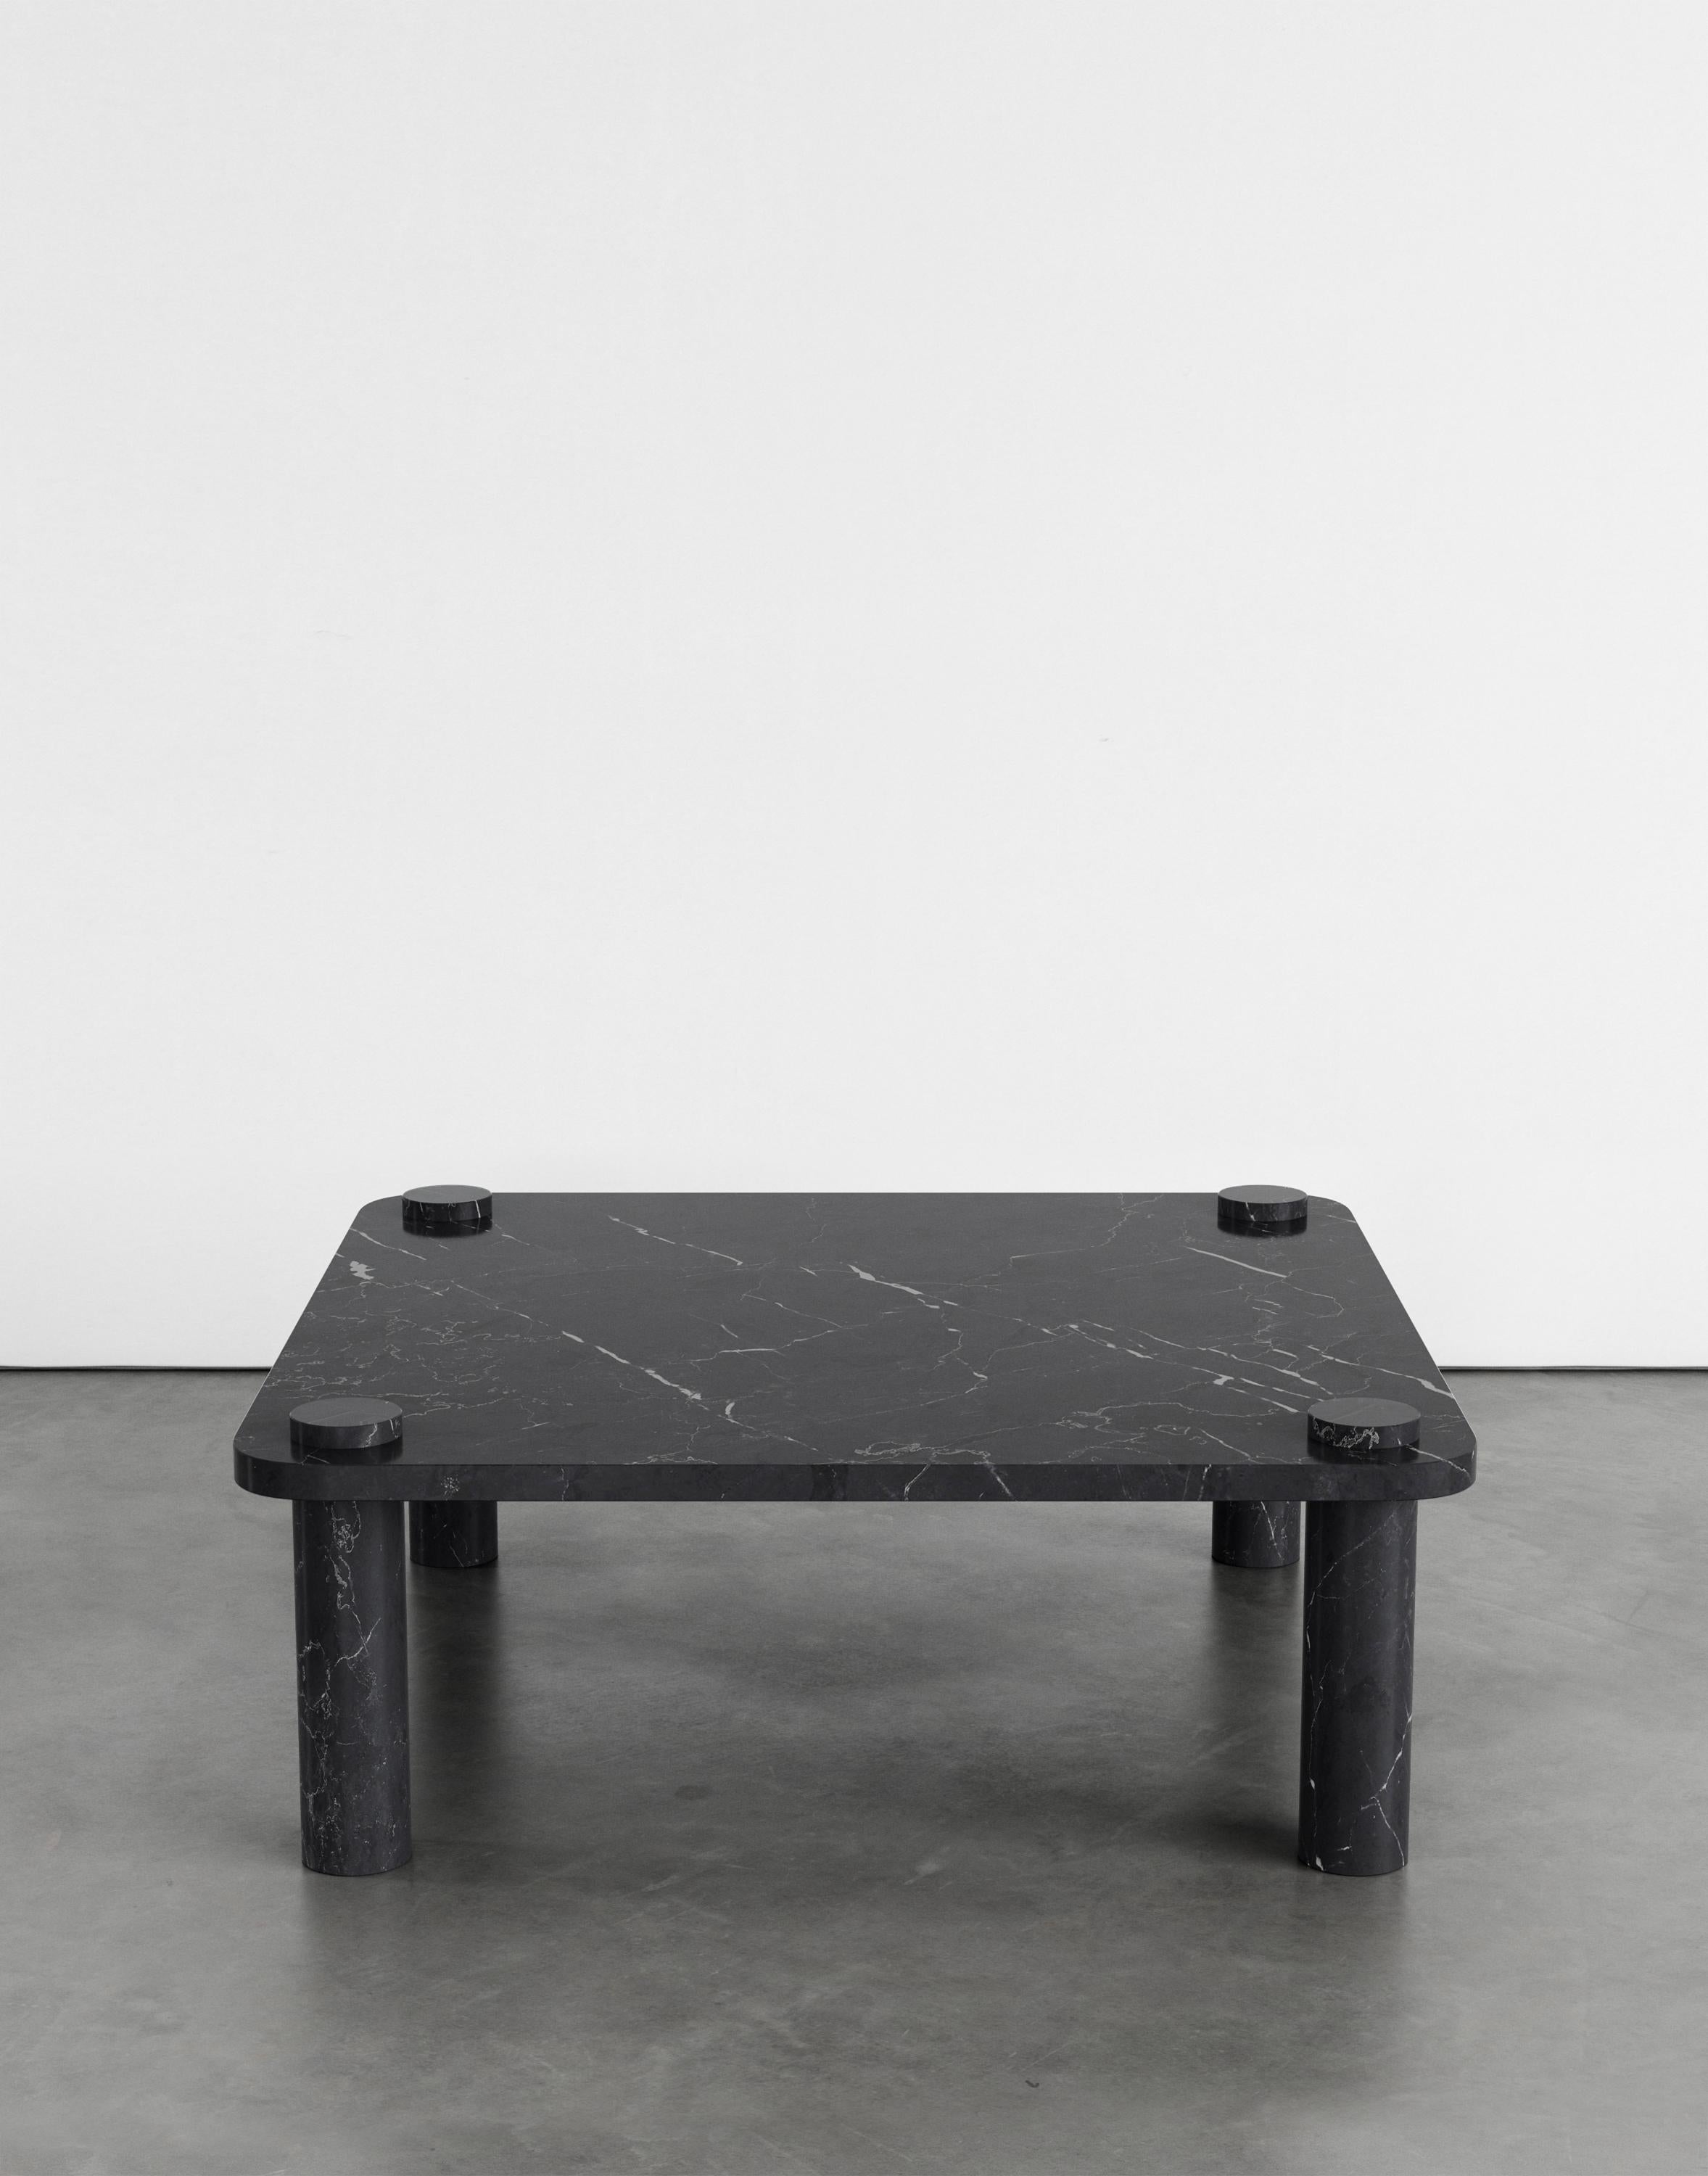 Simone 100 coffee table by Agglomerati
Dimensions: D 100 x W 100 x H 36 cm
Materials: Nero Marquina marble.
Available in other stones.

Simone Coffee Table has minimalist, architectural details that give an appearance of legs piercing through the